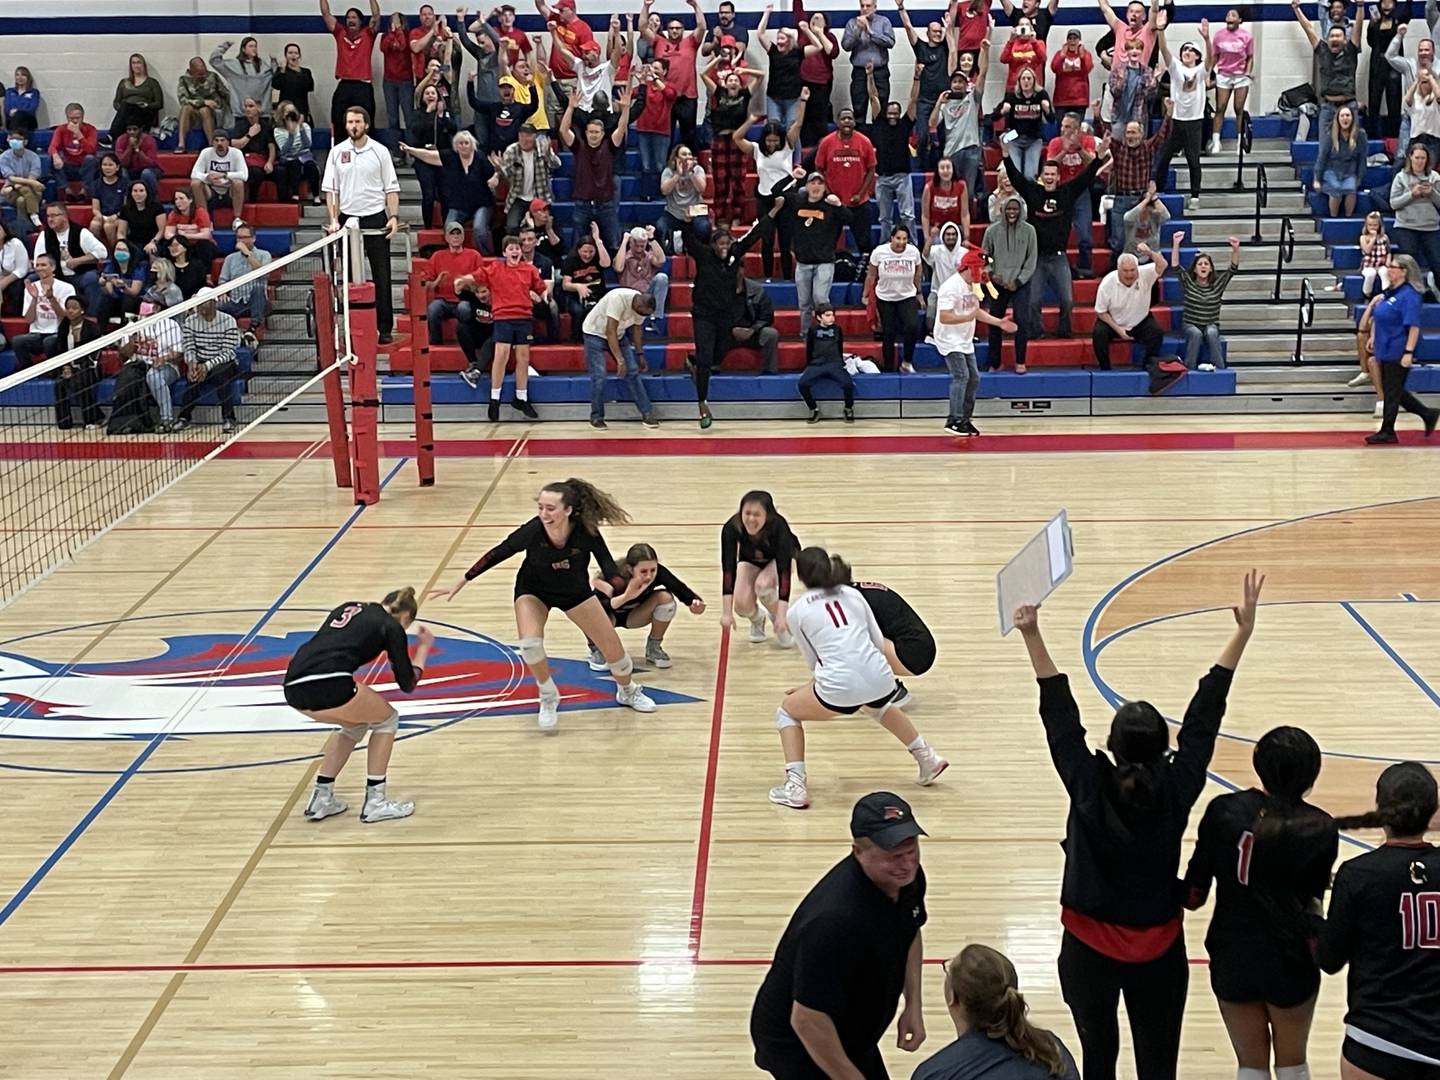 Crofton's volleyball players and their fans celebrate match point in the Cardinals' five-set state-quarterfinals victory over top-seeded Centennial Friday night. The Anne Arundel County program is only two years old and headed to the Class 3A state semifinals.